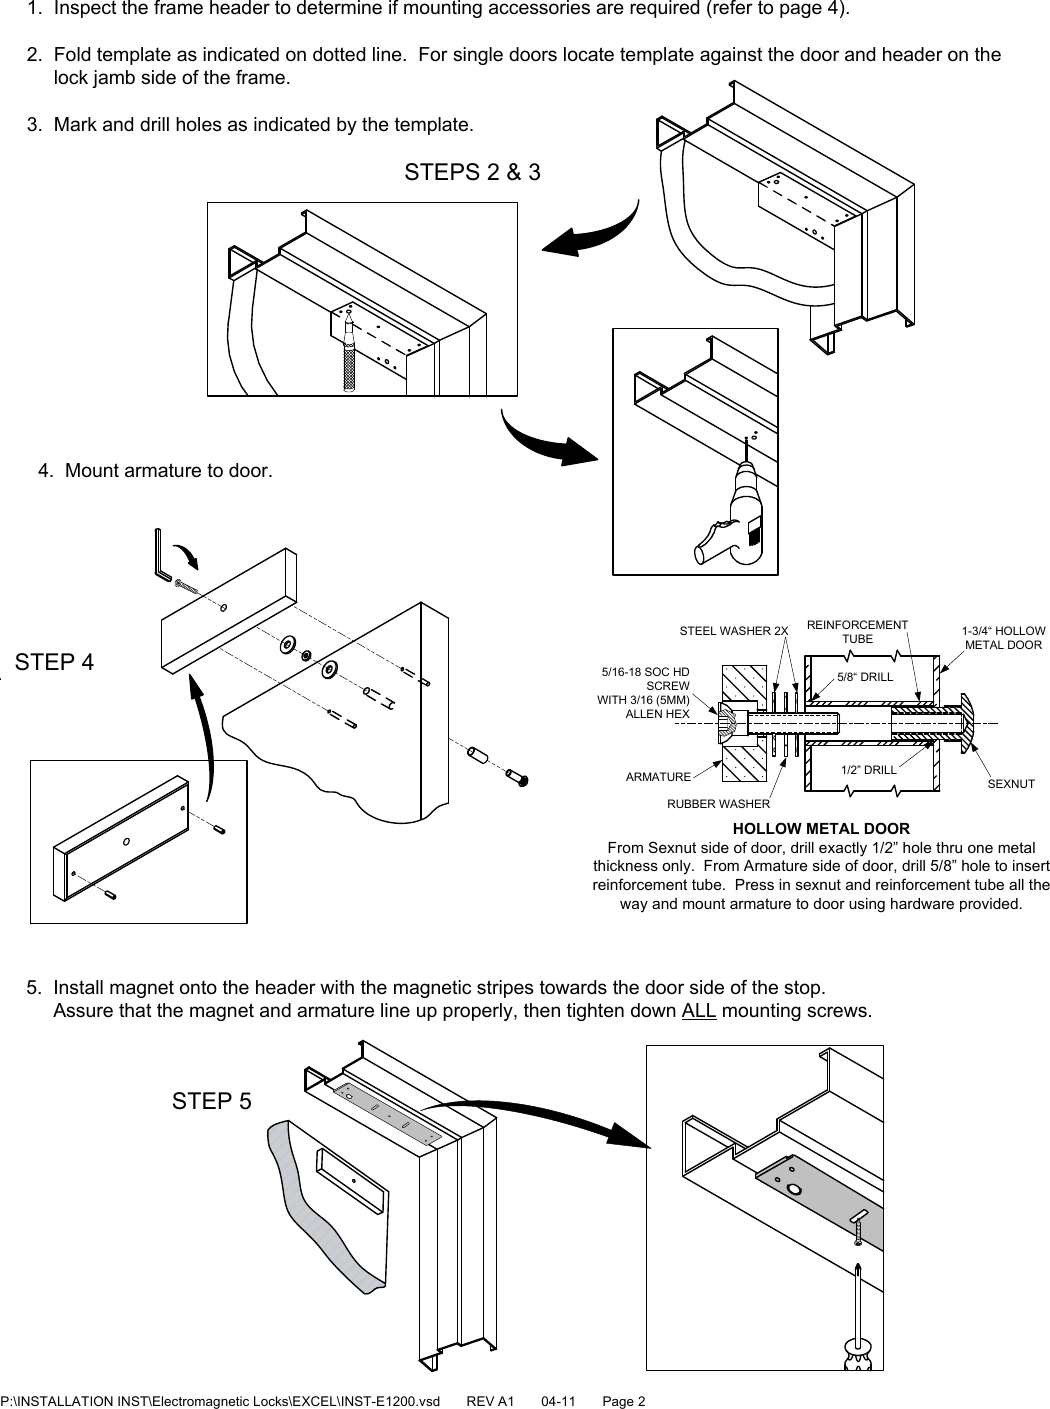 Page 2 of 4 - SDC INST-E1200 Installation Instructions E1200 Series Magnetic Lock